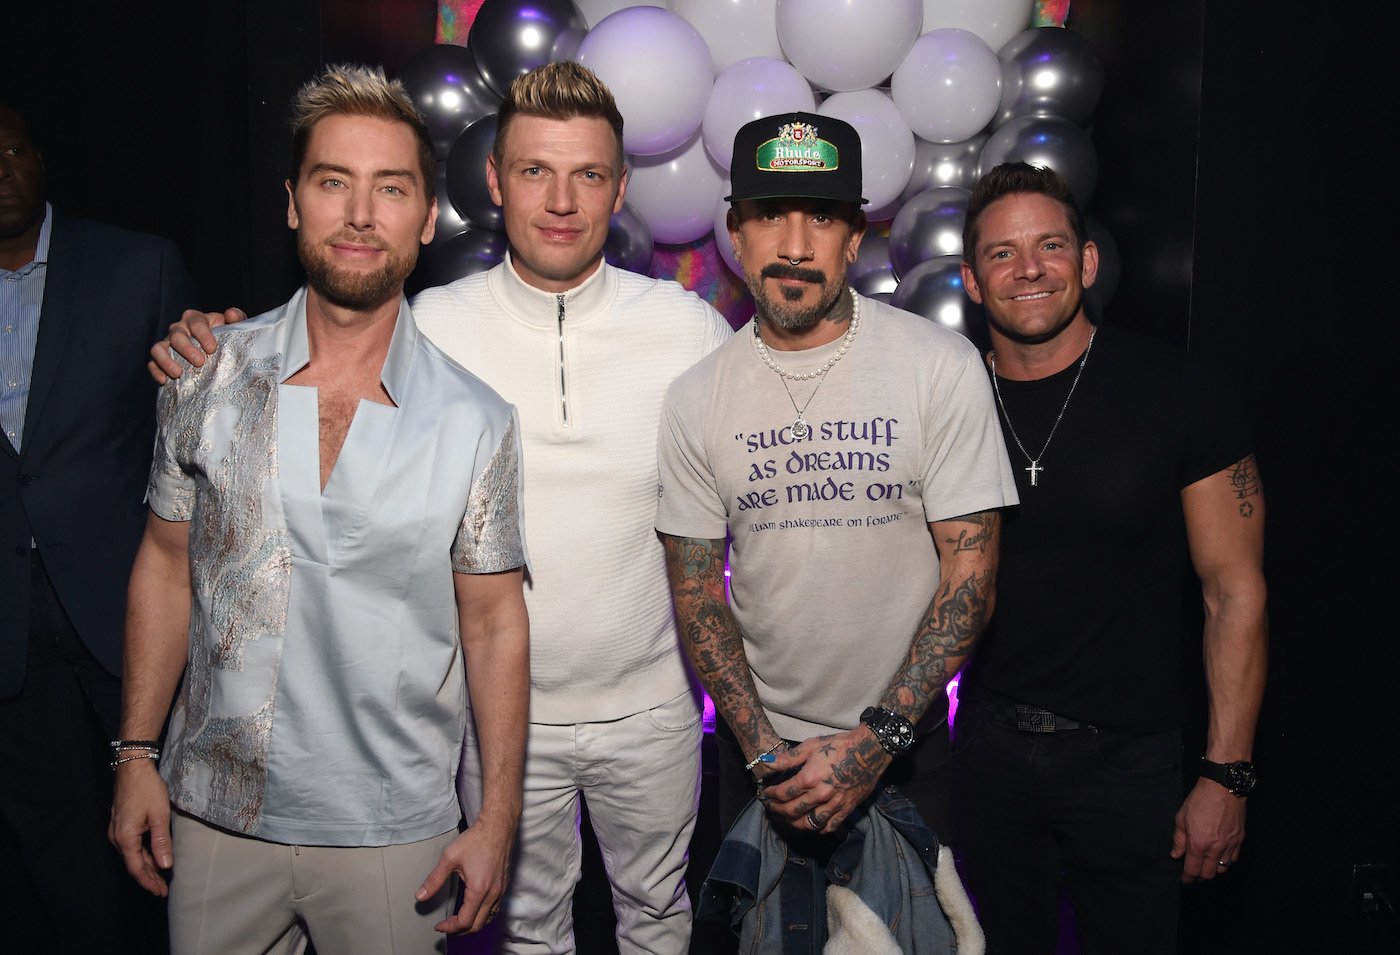 Lance Bass, Nick Carter, AJ McLean, and Jeff Timmons attended an event